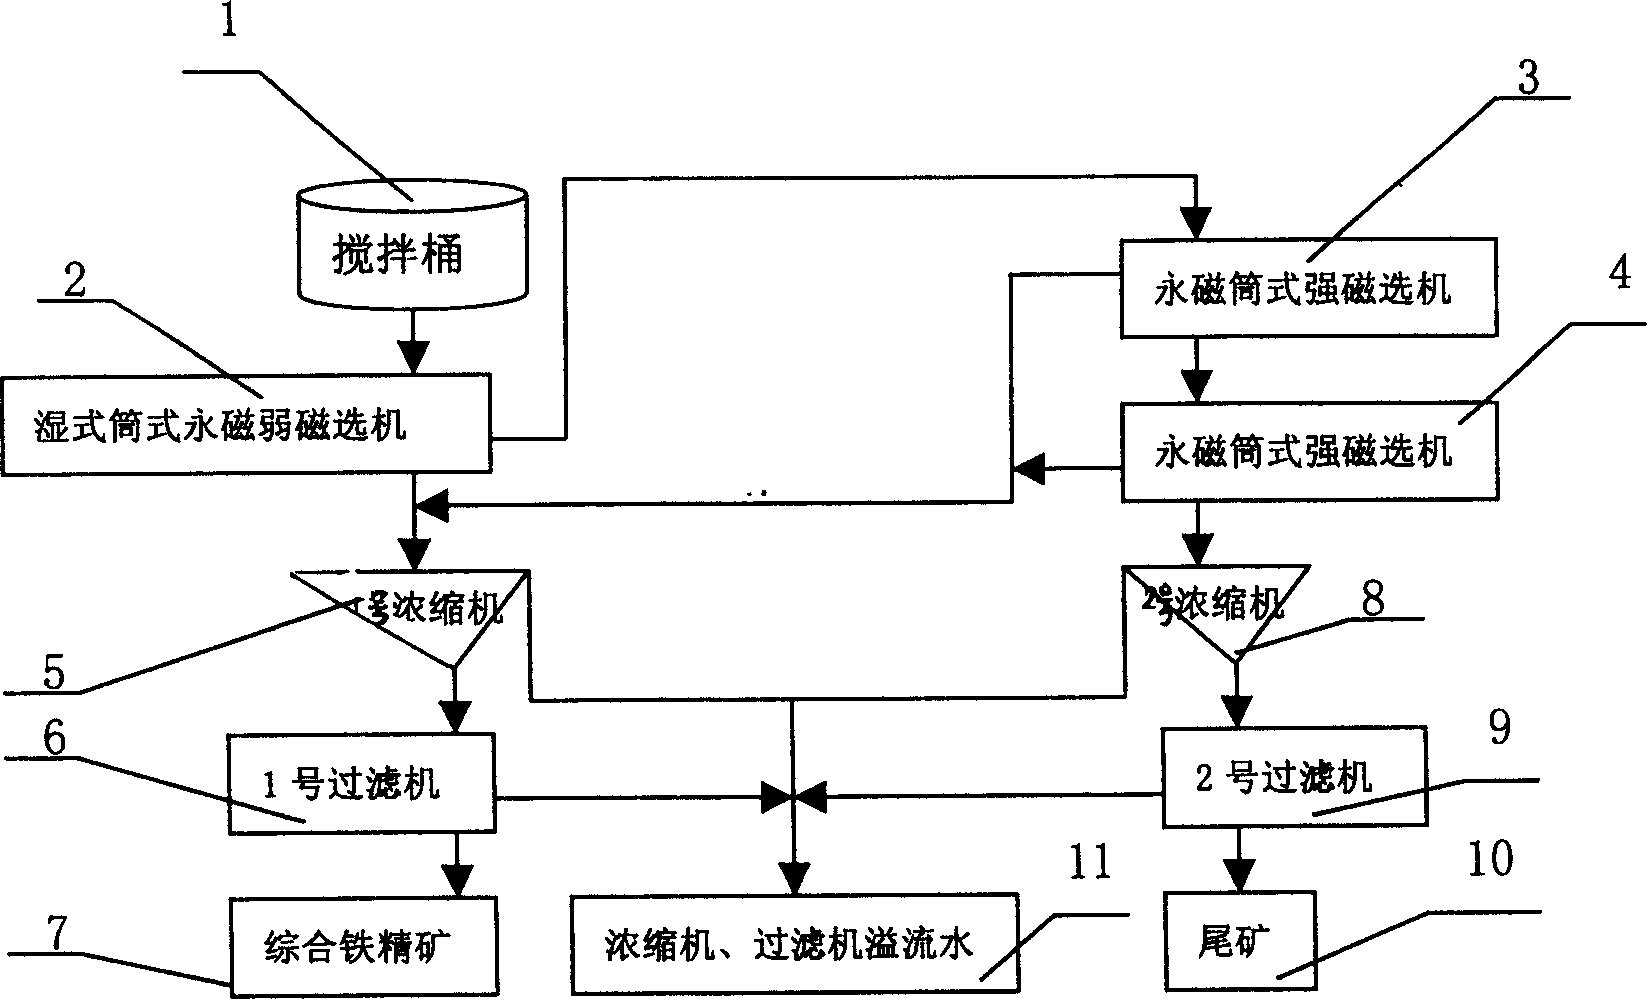 Method for recovering iron concentrate from blast furnace dust